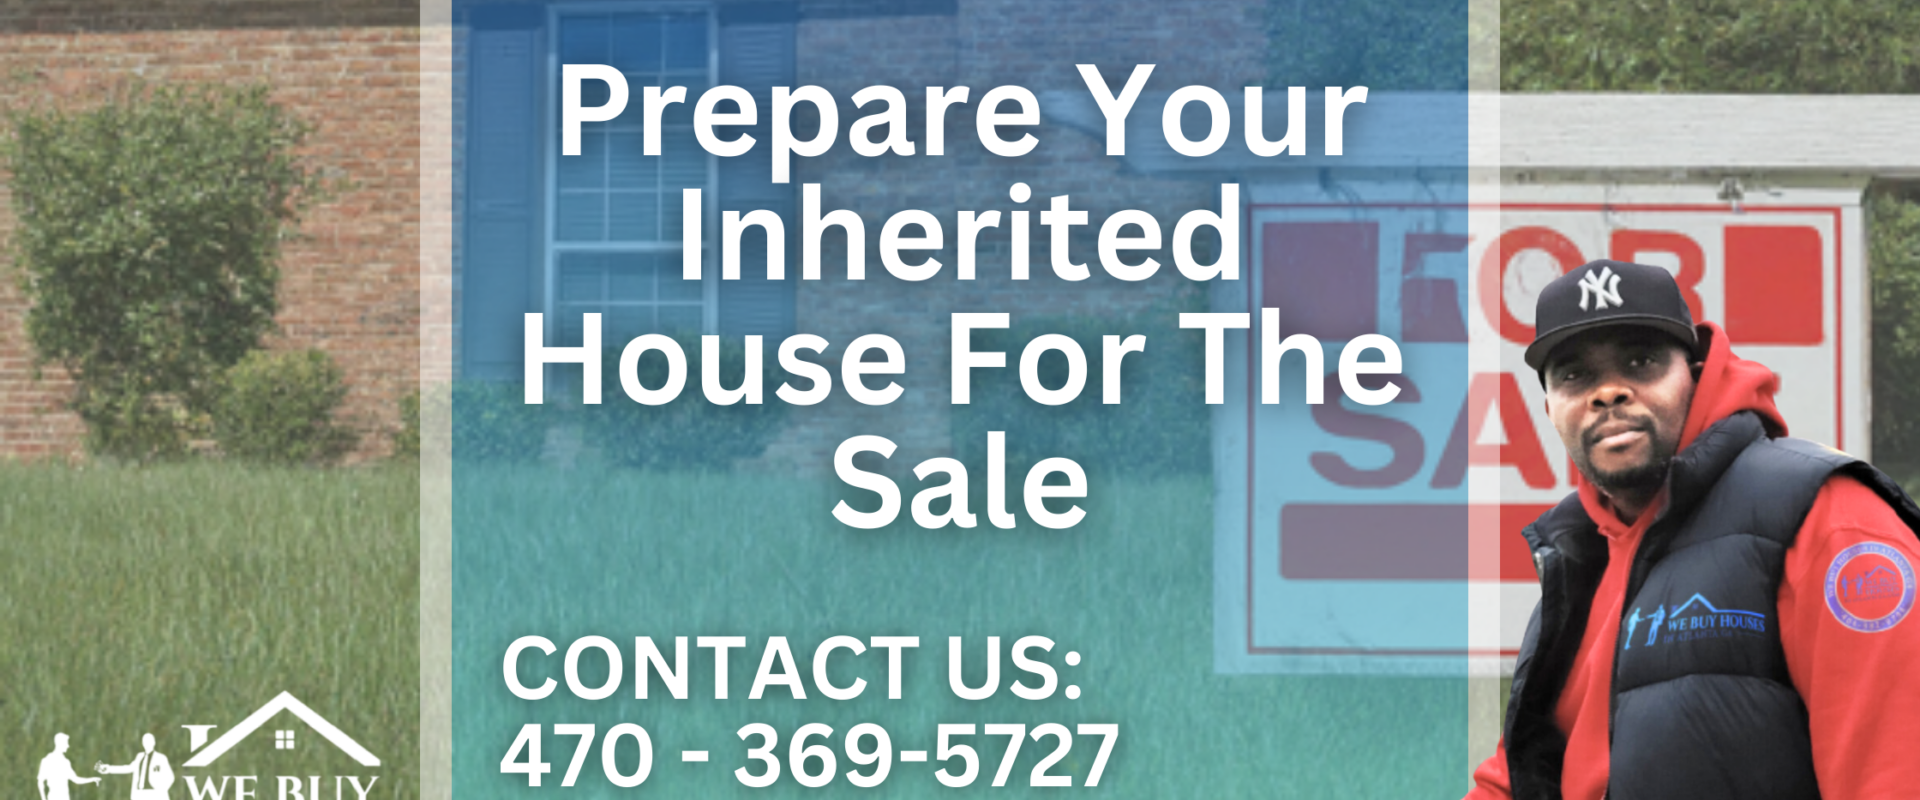 Prepare Your Inherited House For The Sale